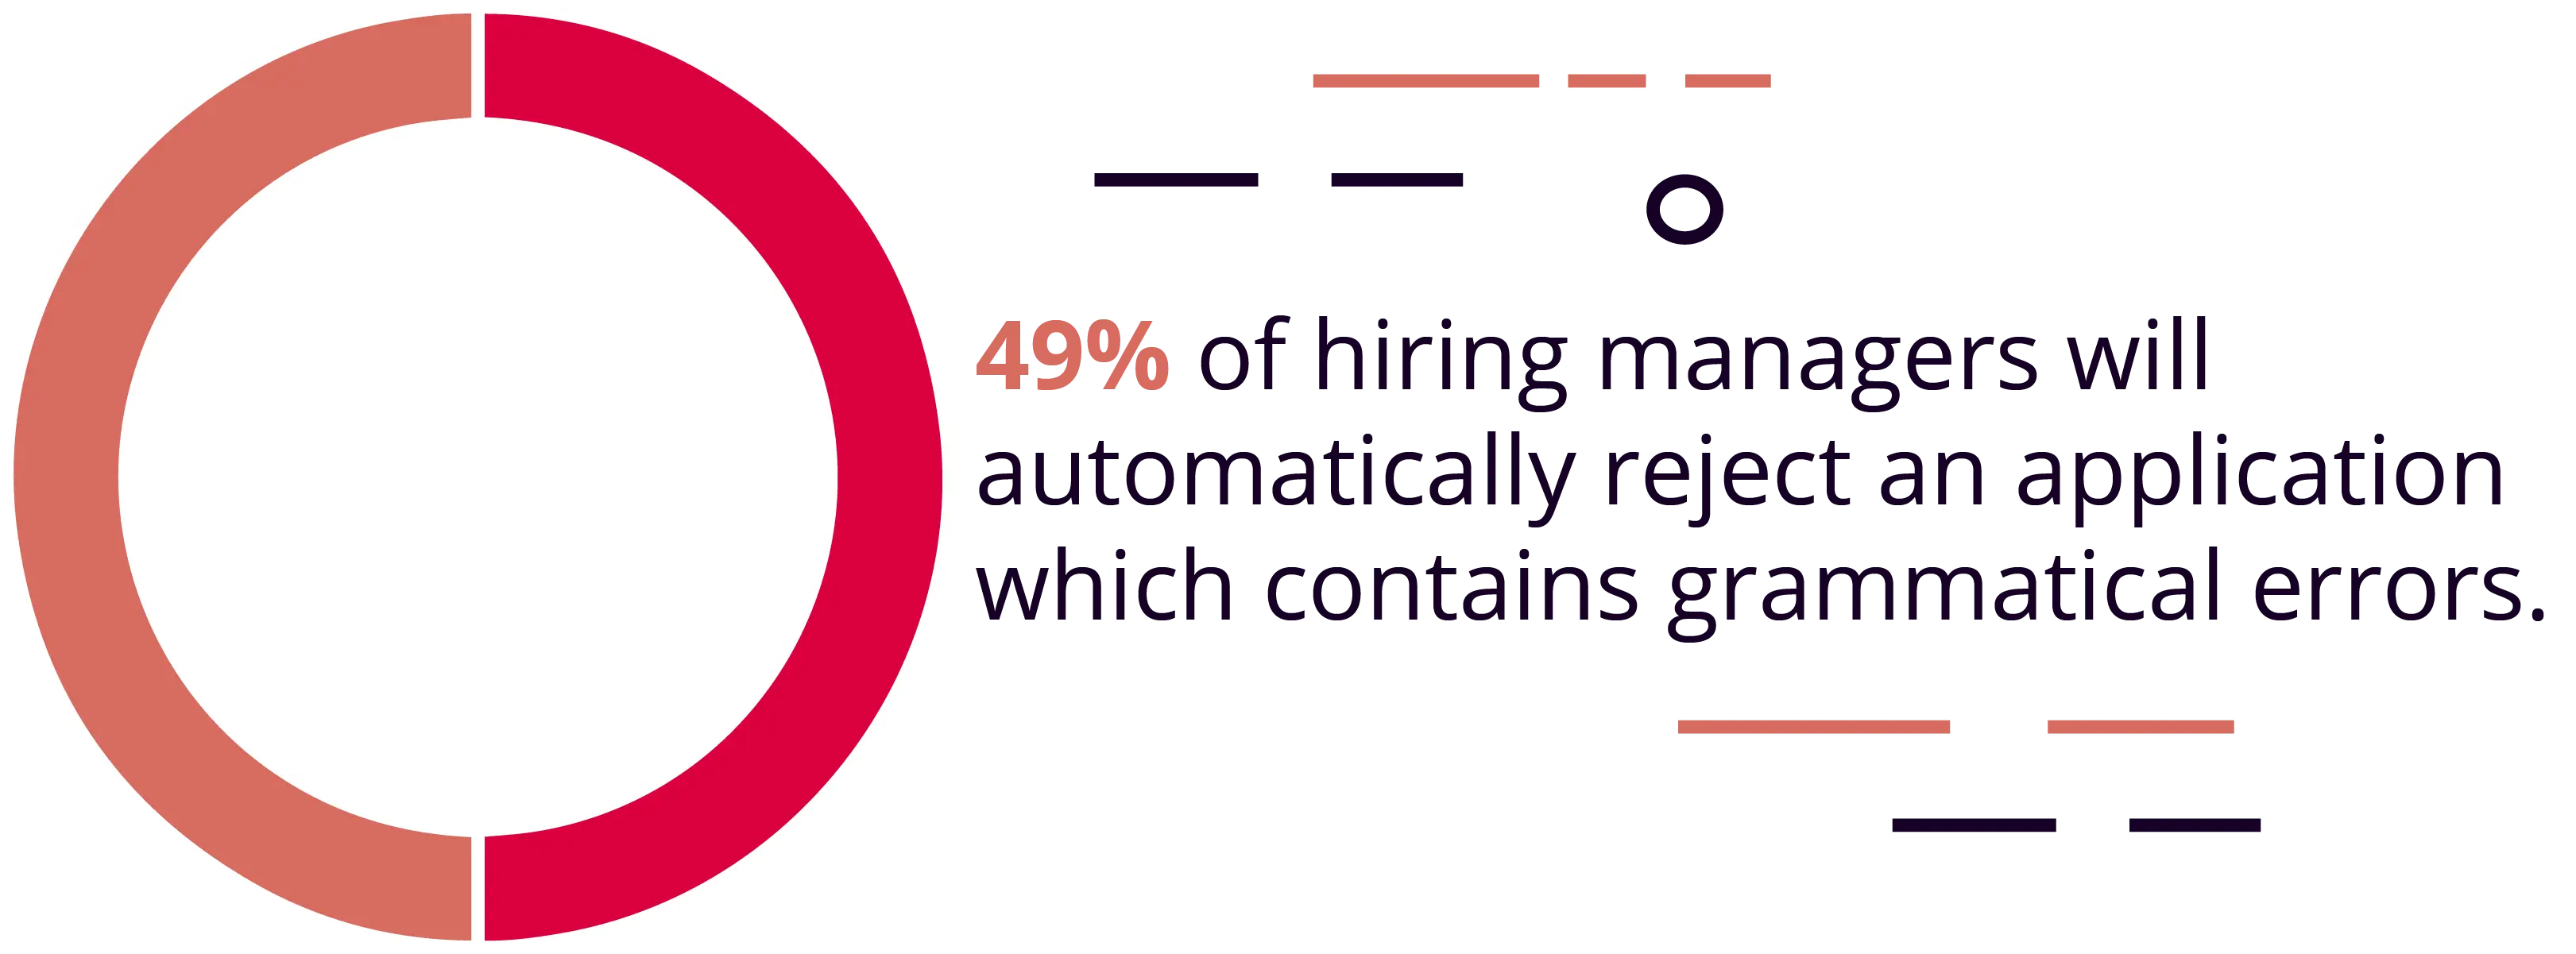 Half of Hiring Managers Said They Would Automatically Dismiss an Application If It Contained Spelling or Grammatical Errors